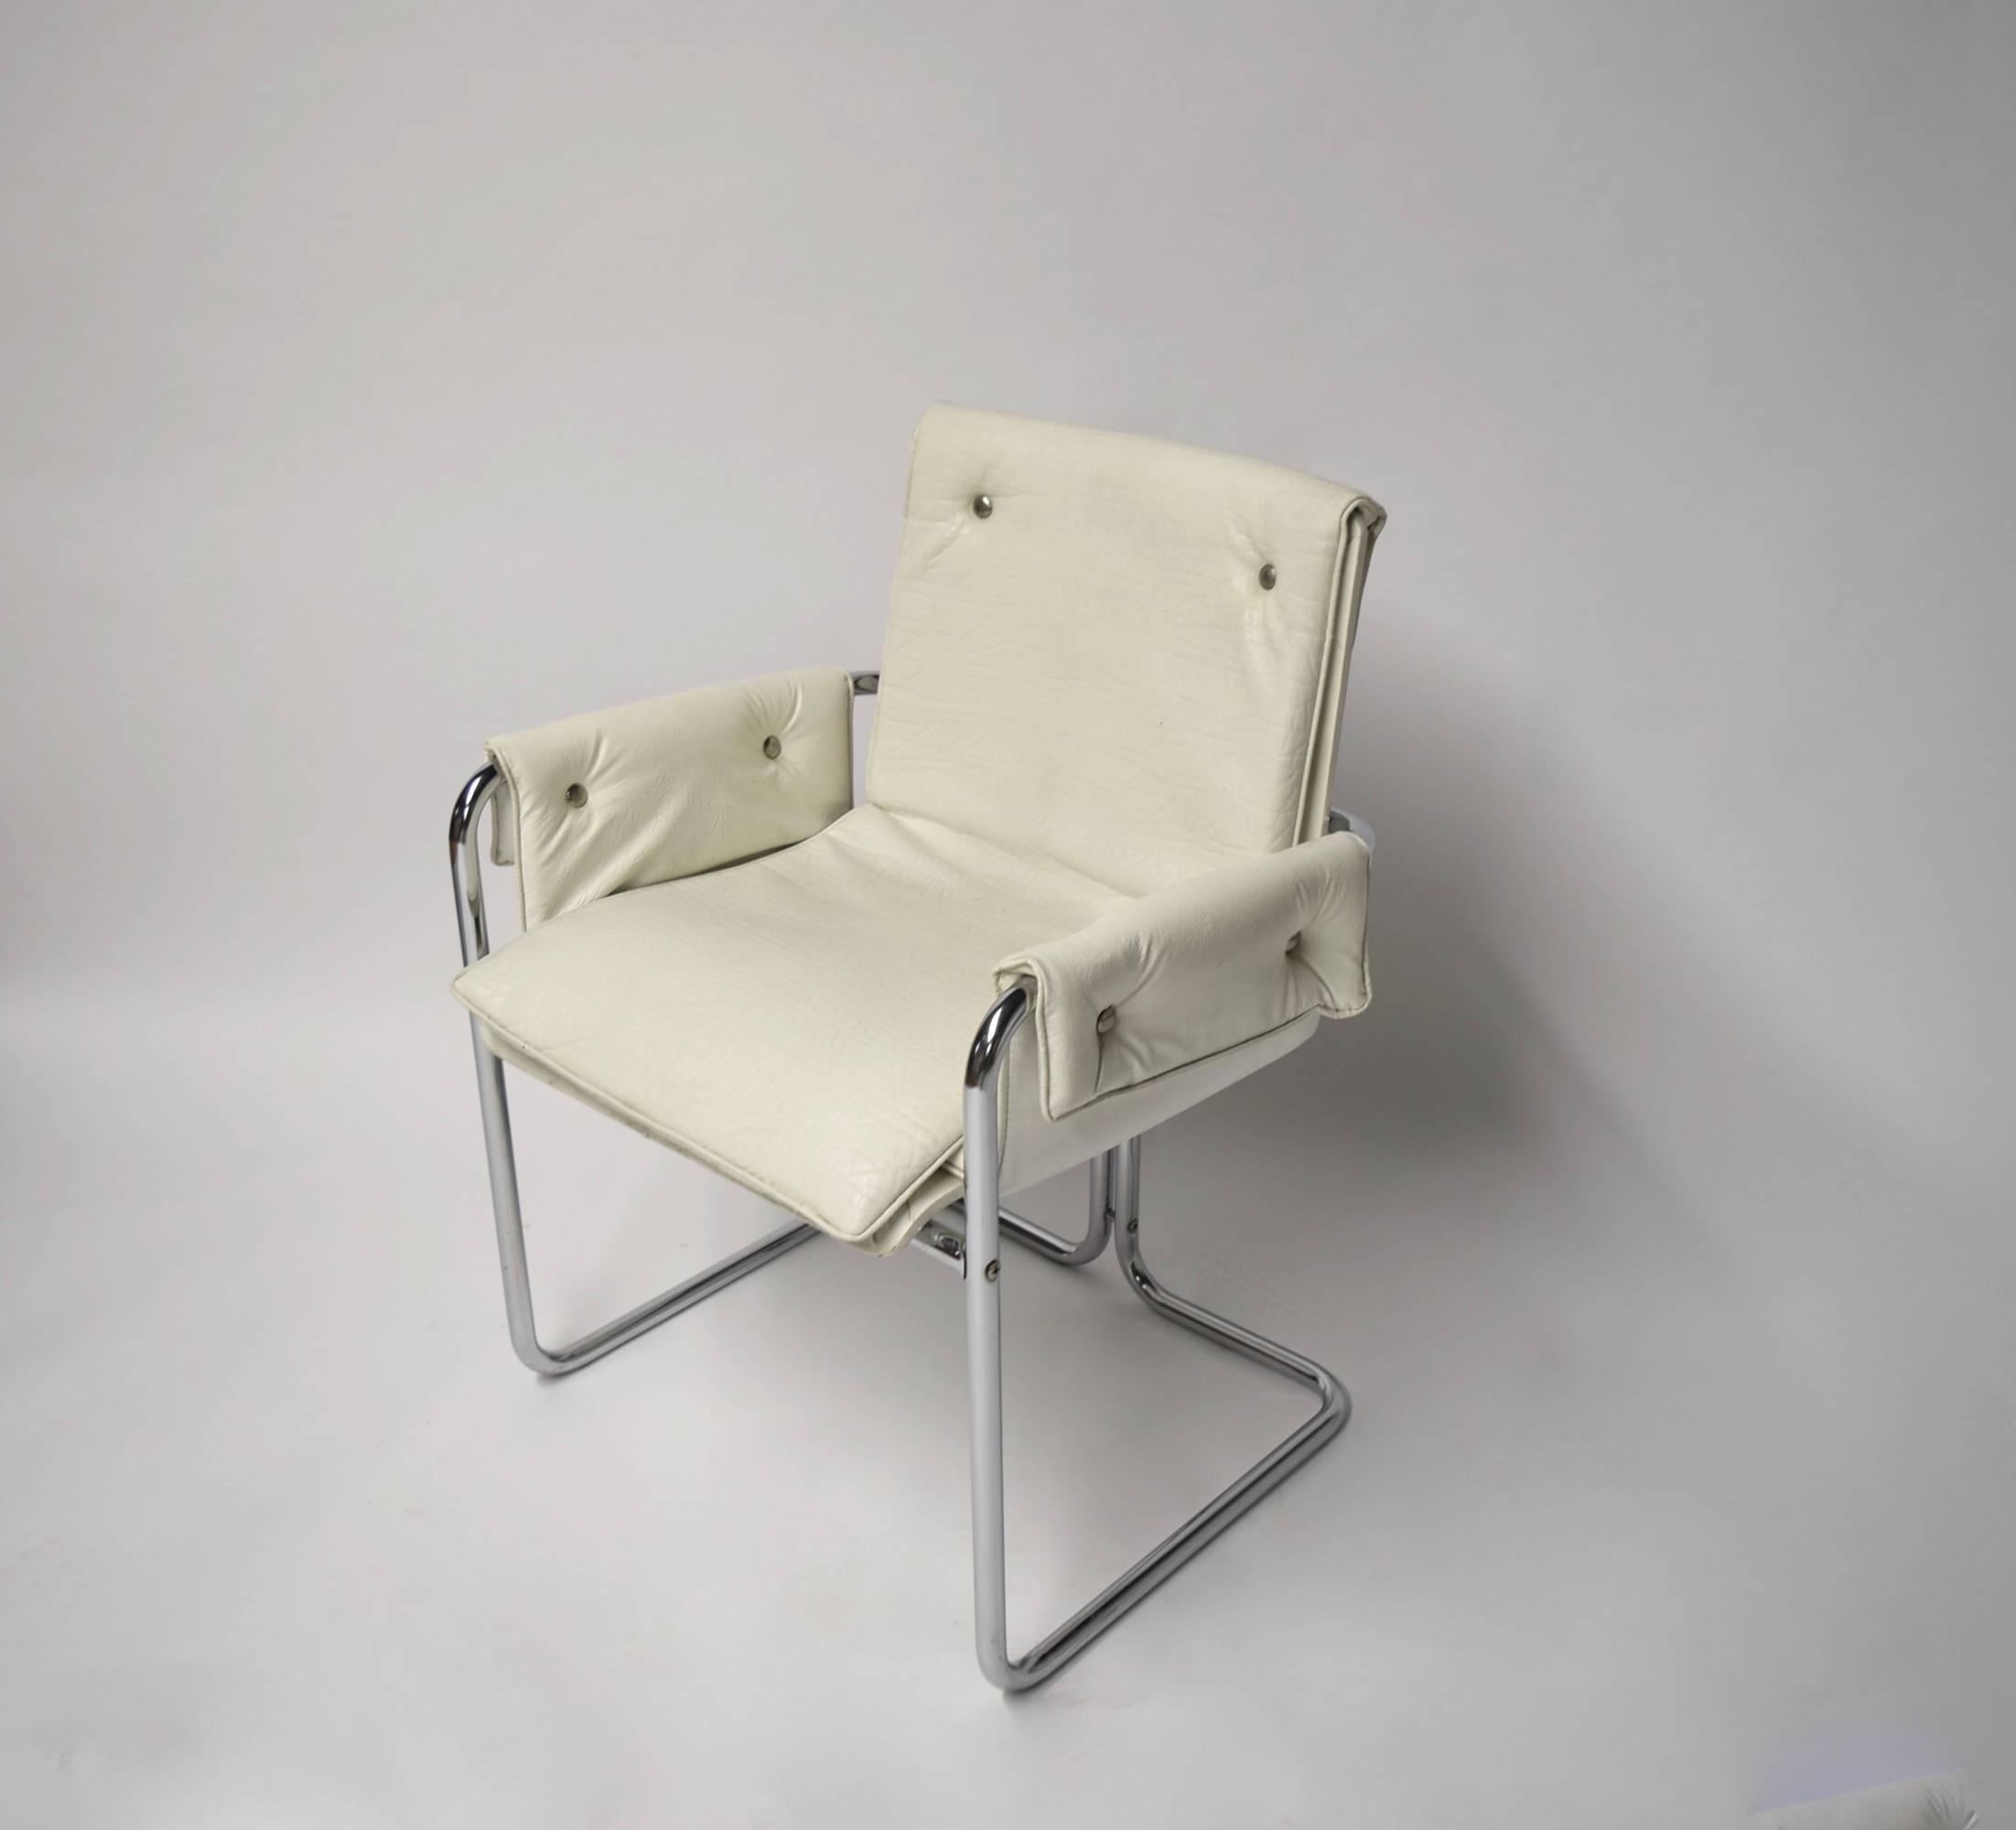 Four dining height armchairs with a chromed framed and bentwood seats with upholstered cushions in white vinyl that are secured by metal snaps.
Measures: Arm height: 23 inches.